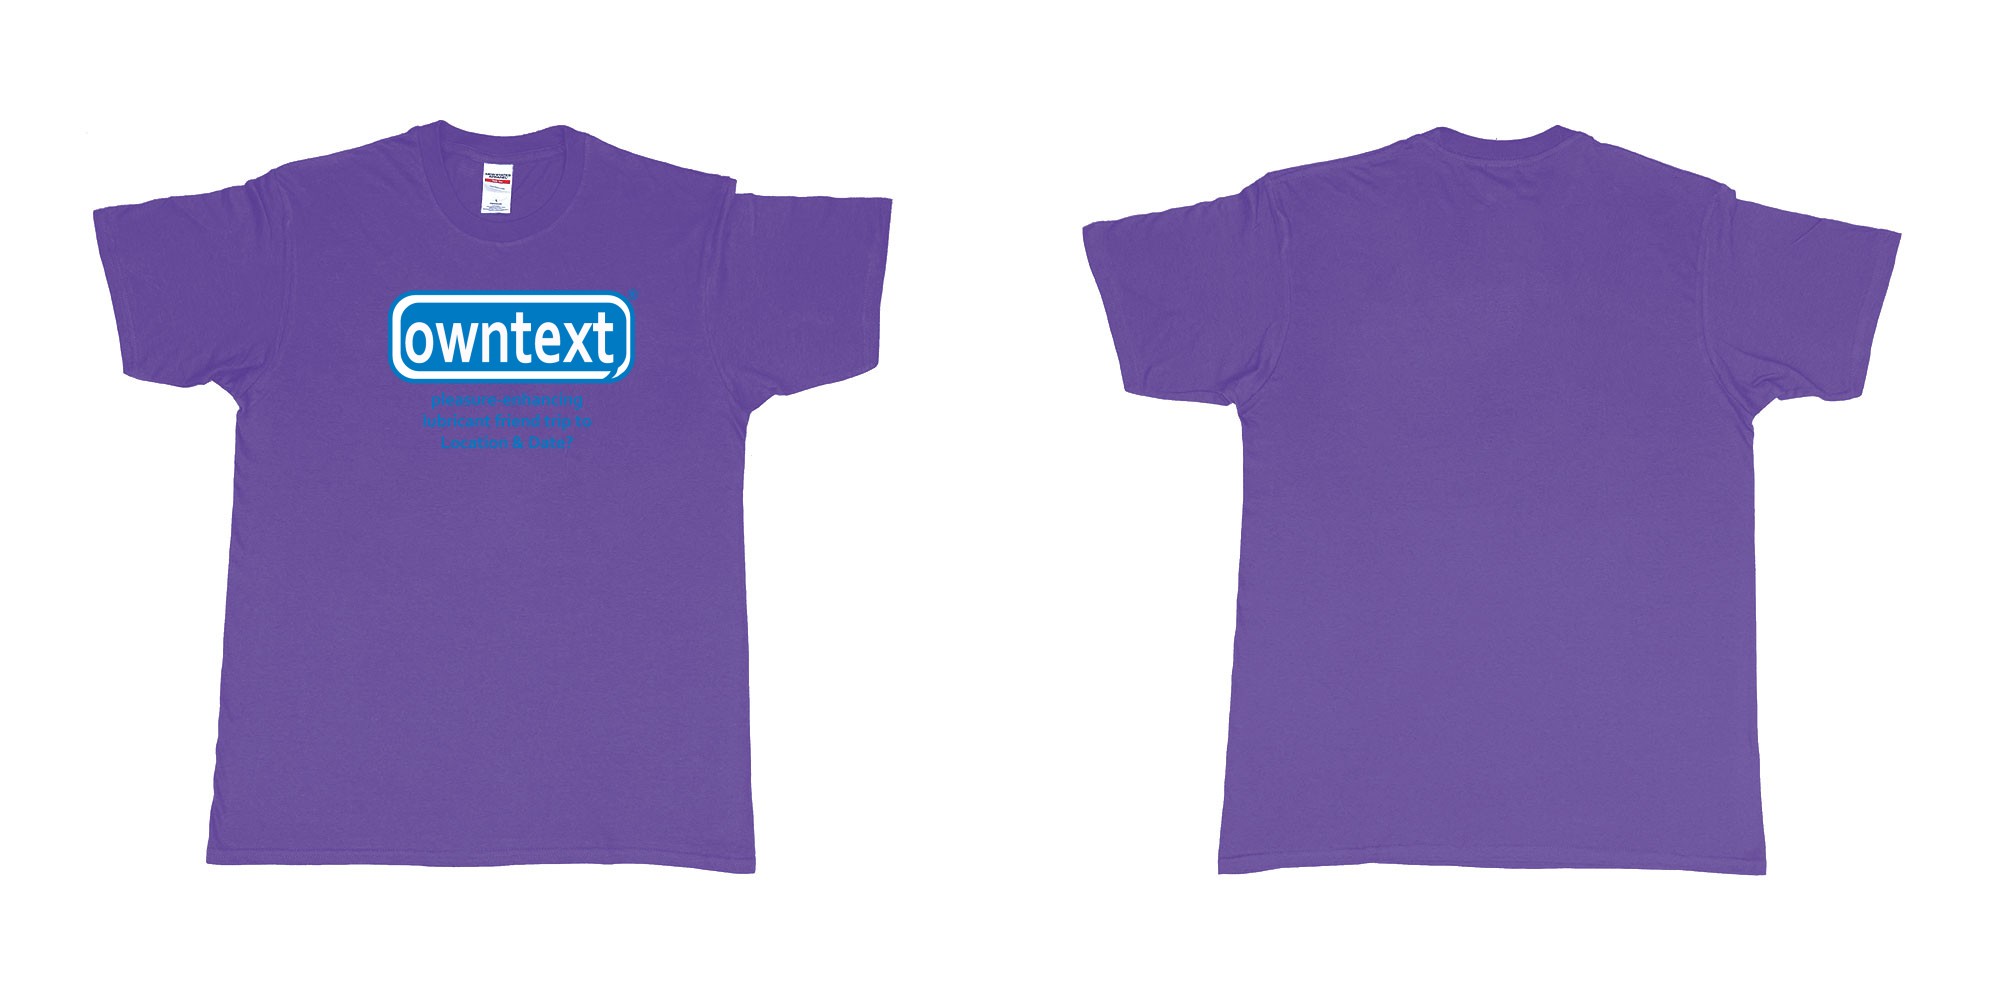 Custom tshirt design Durex in fabric color purple choice your own text made in Bali by The Pirate Way